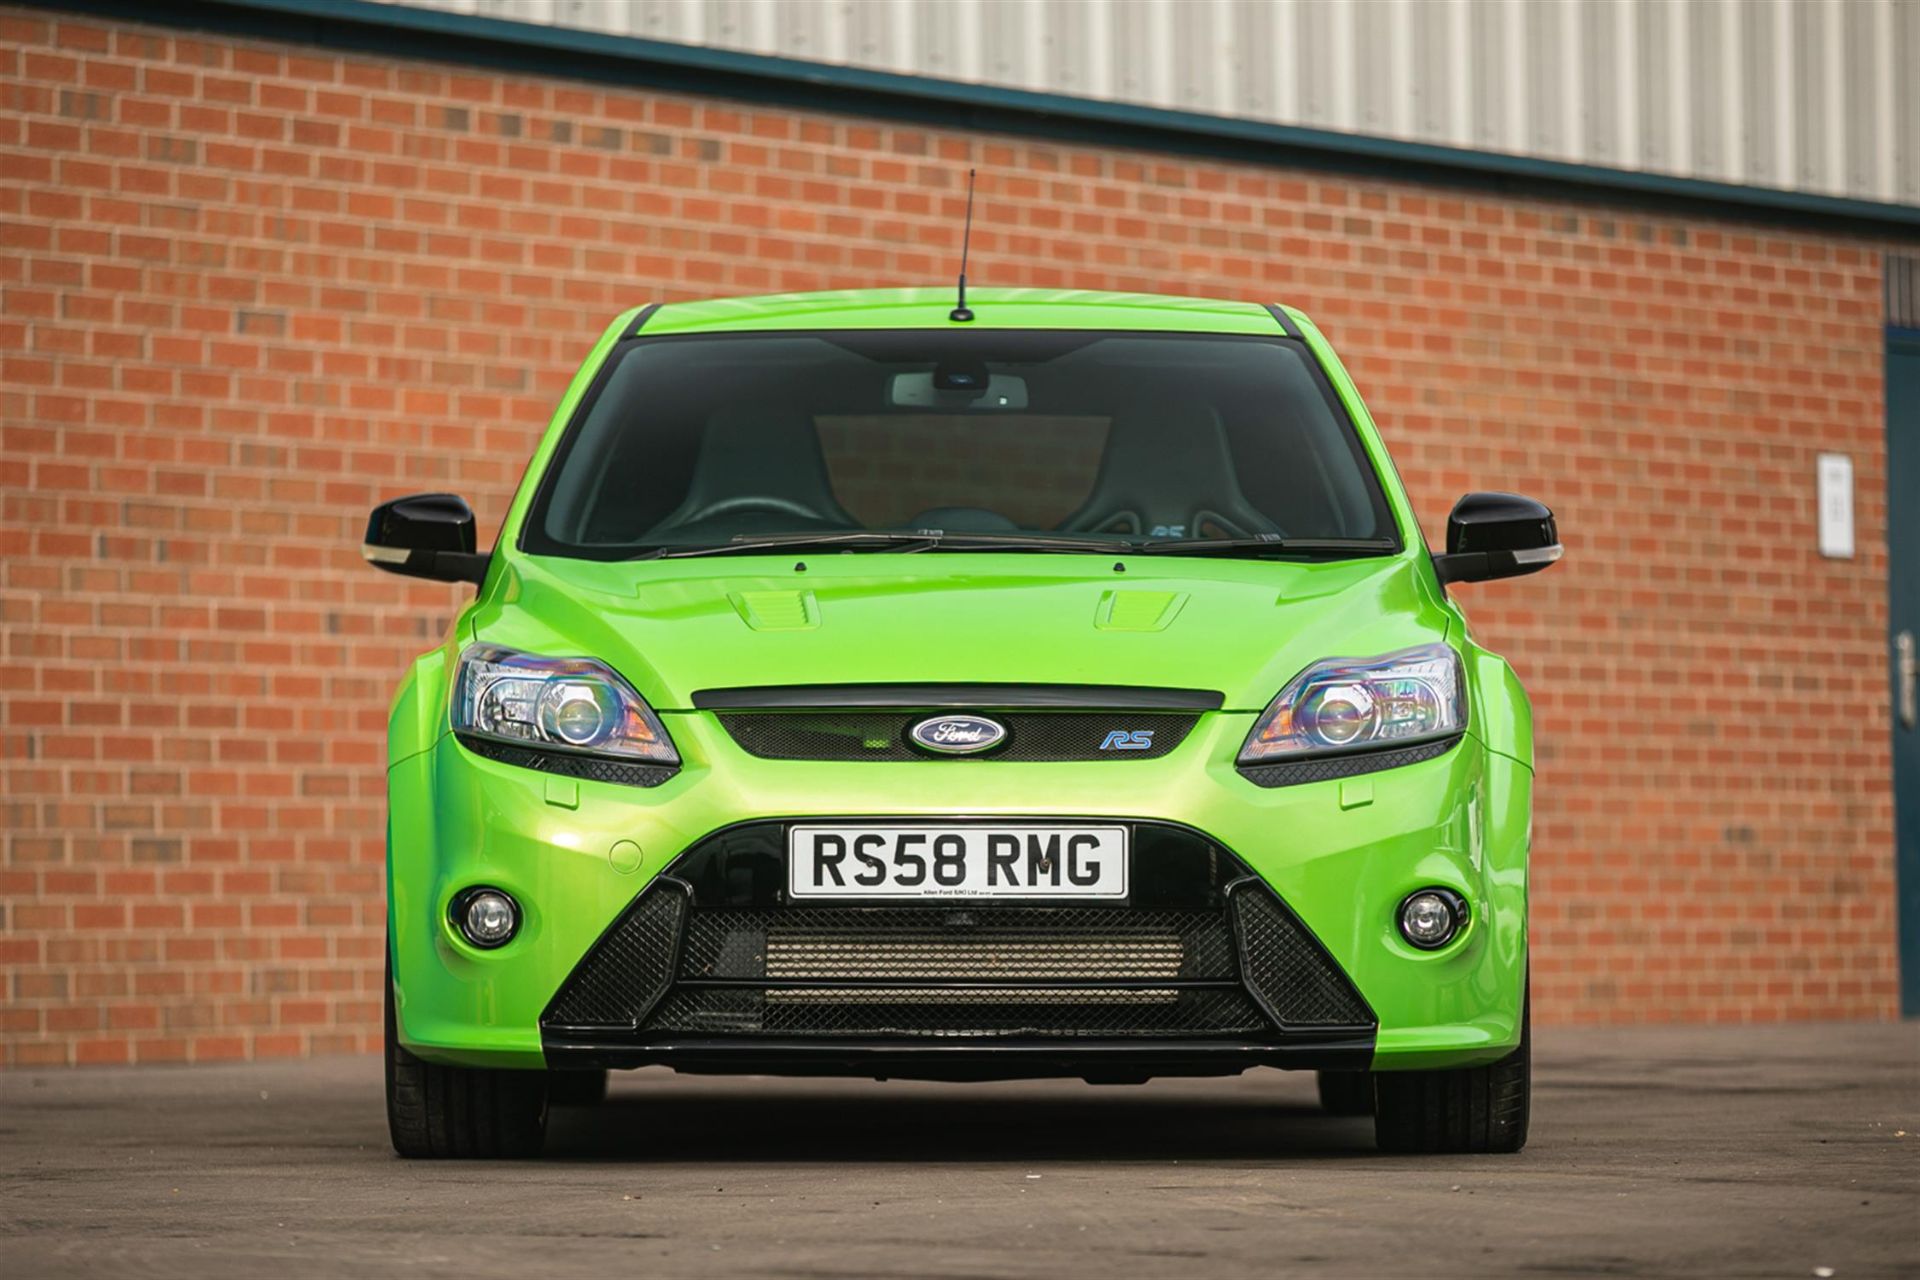 2010 Ford Focus RS Mk2 - Image 7 of 10